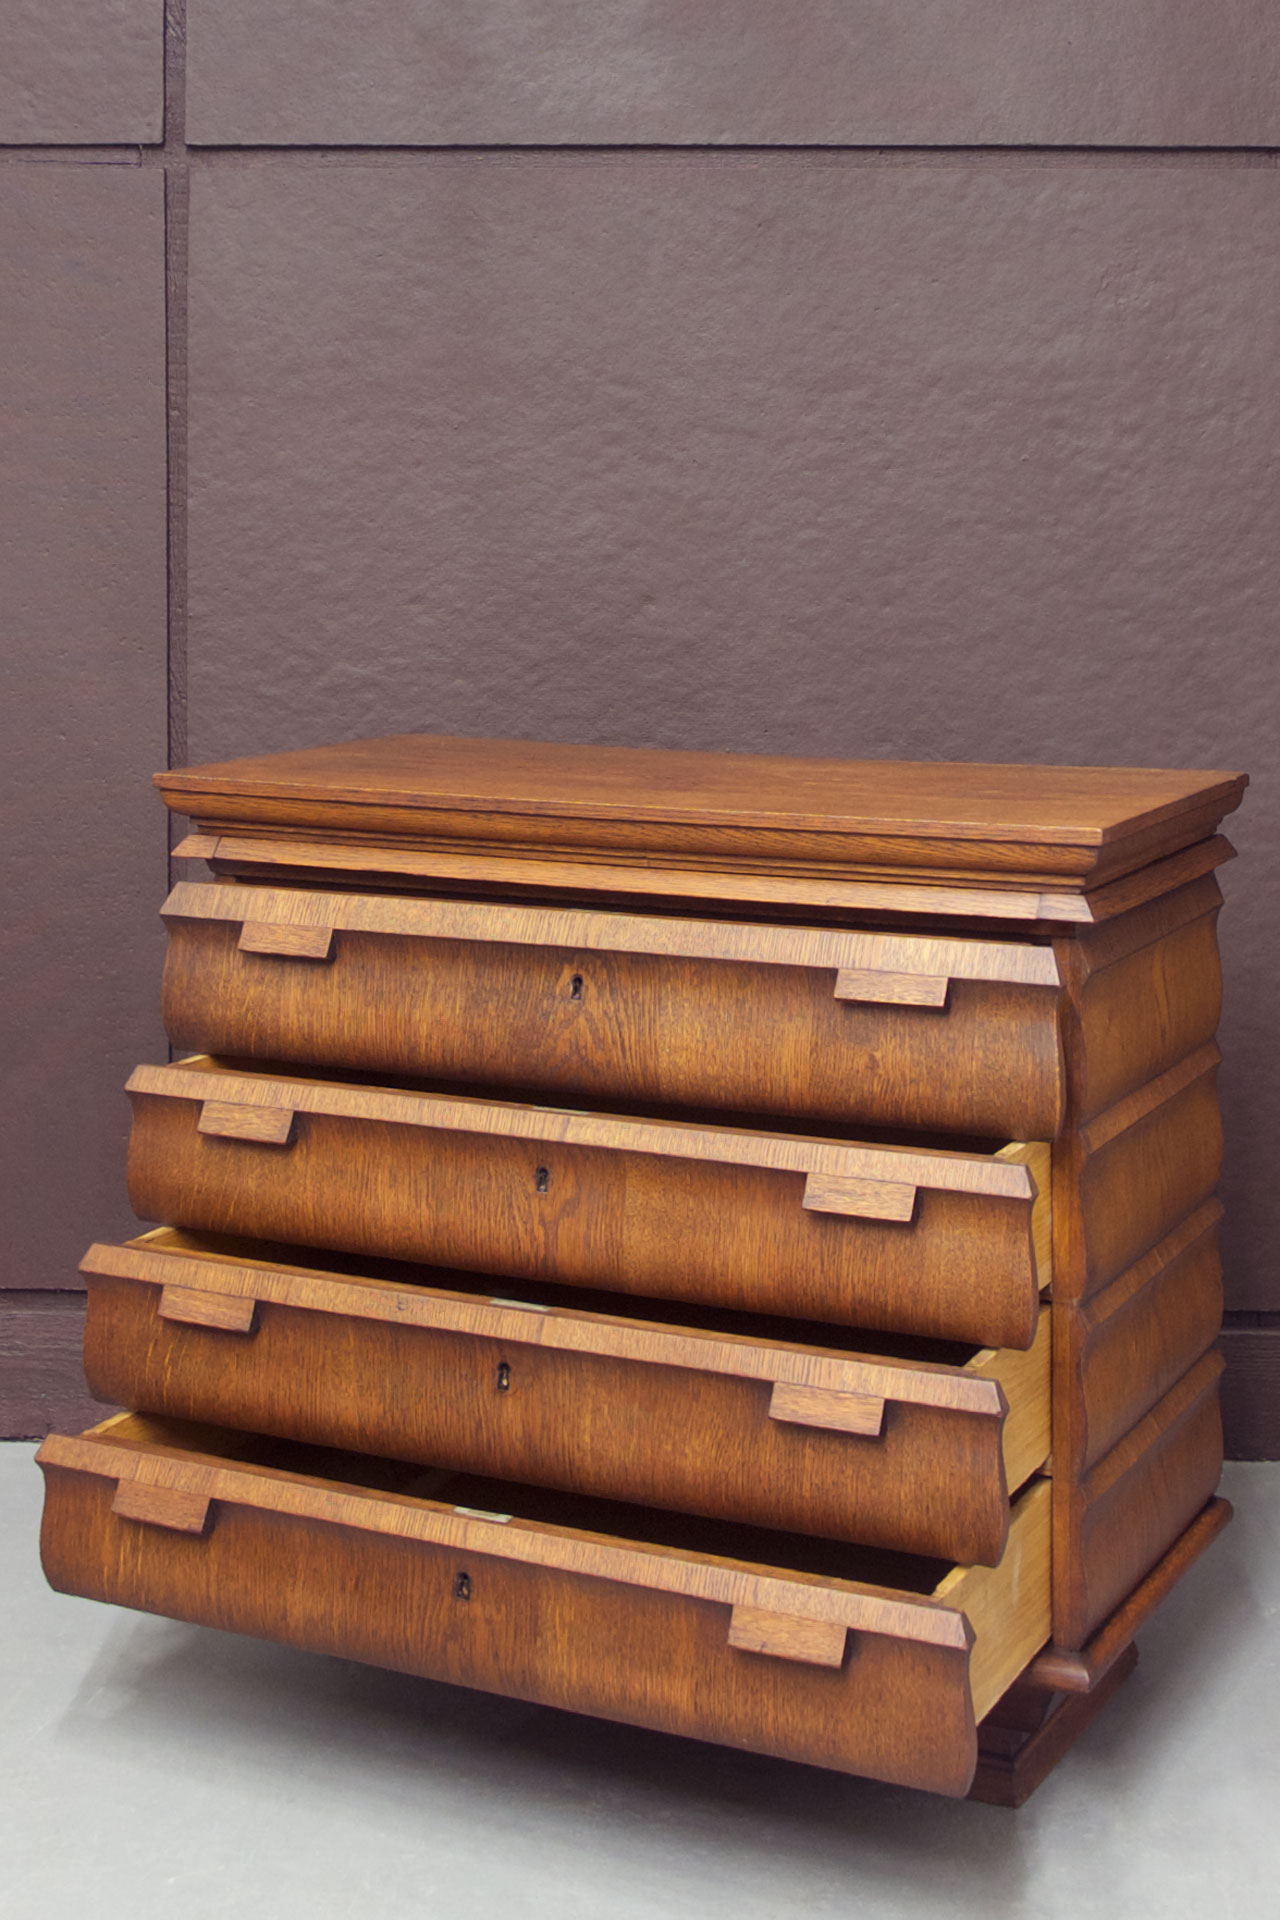 An expressionist rococo chest of drawers